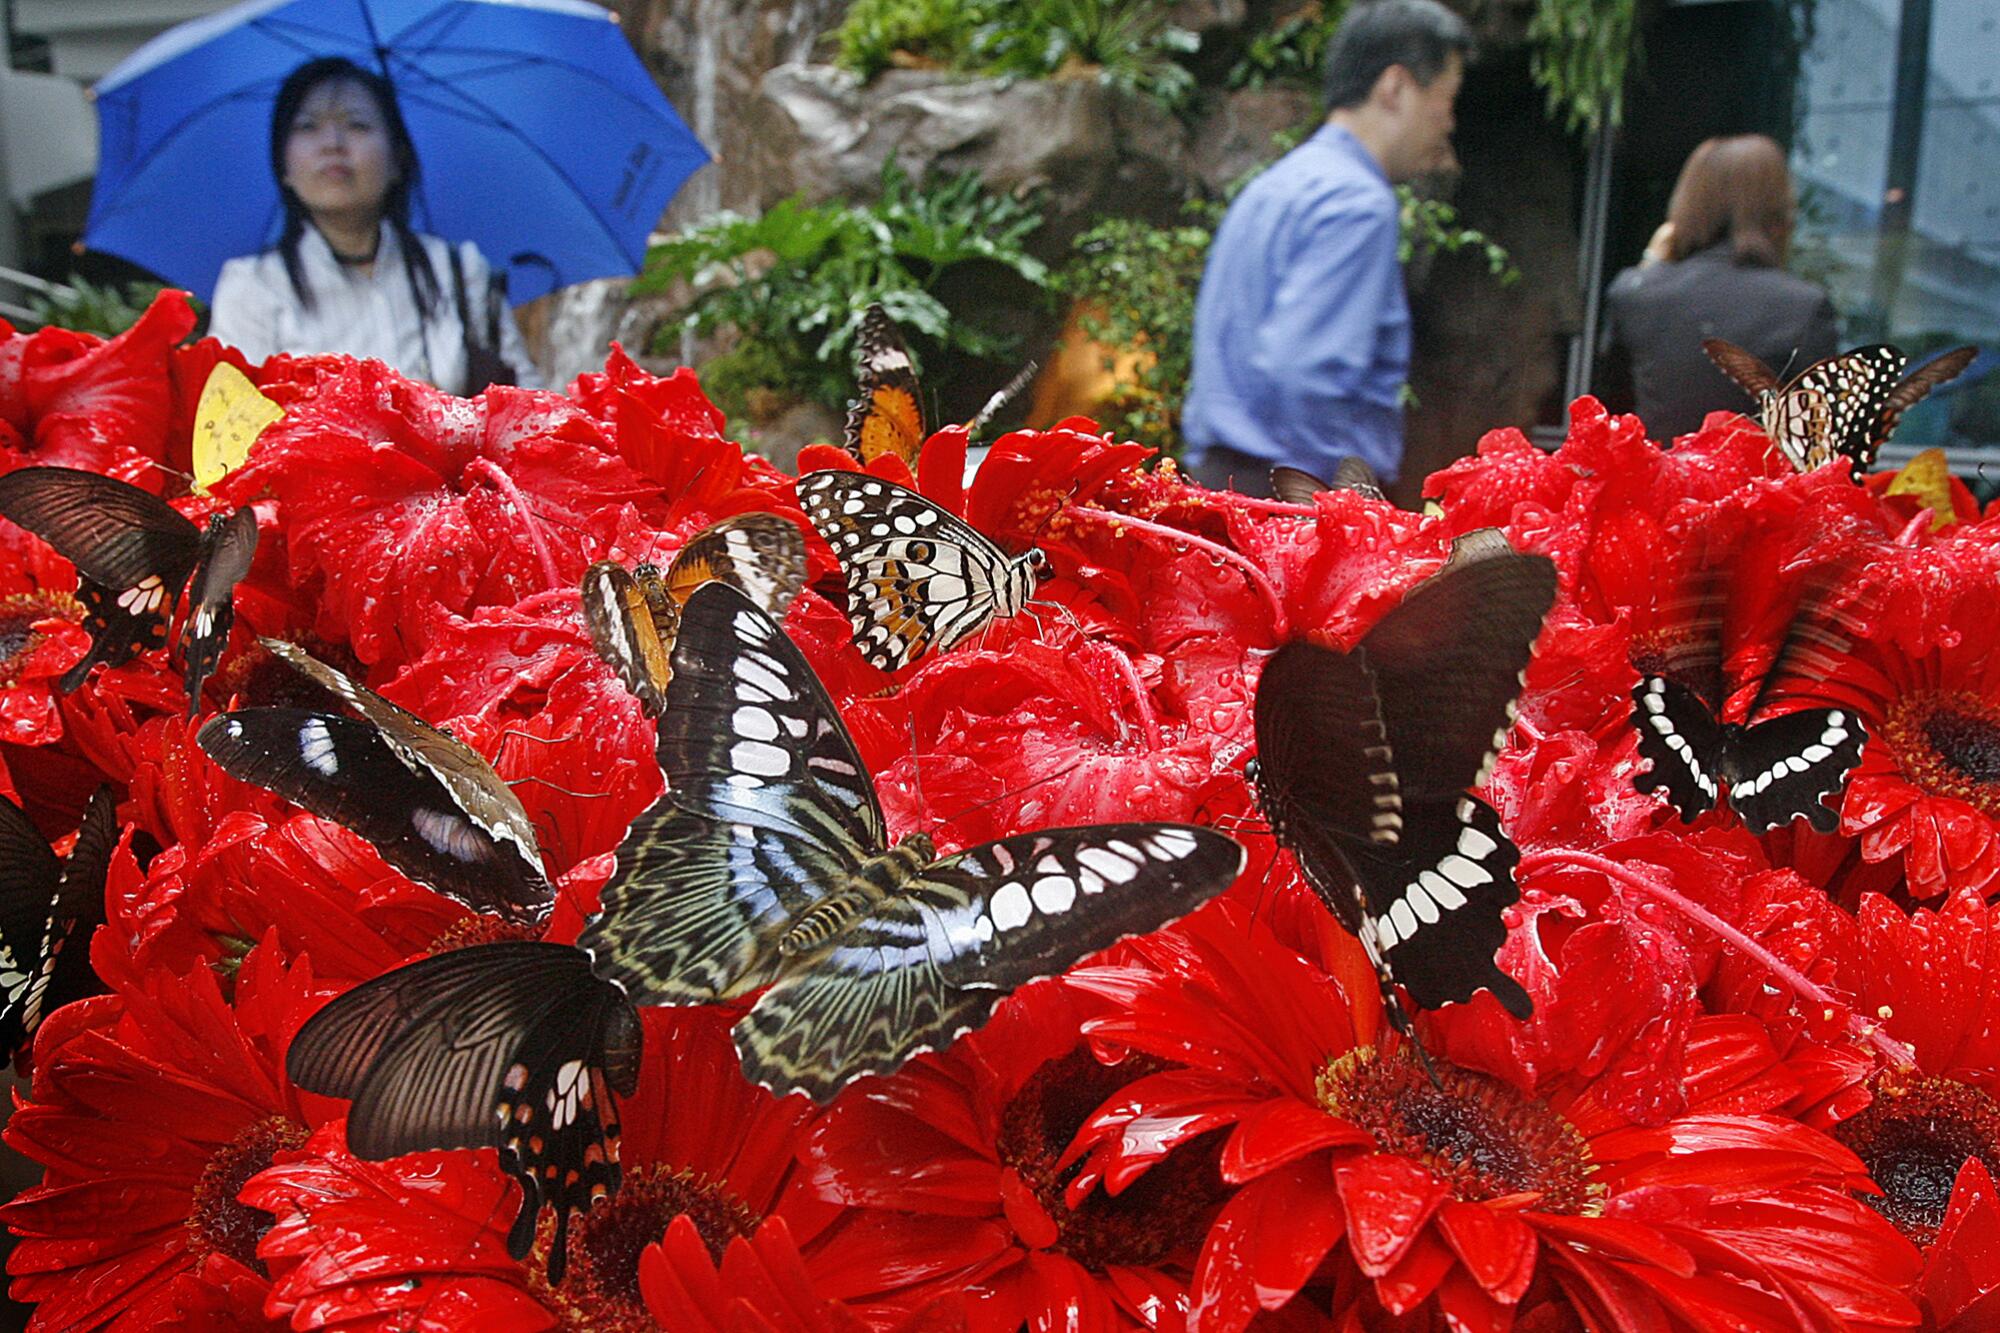 The butterfly garden at Changi Airport in Singapore.